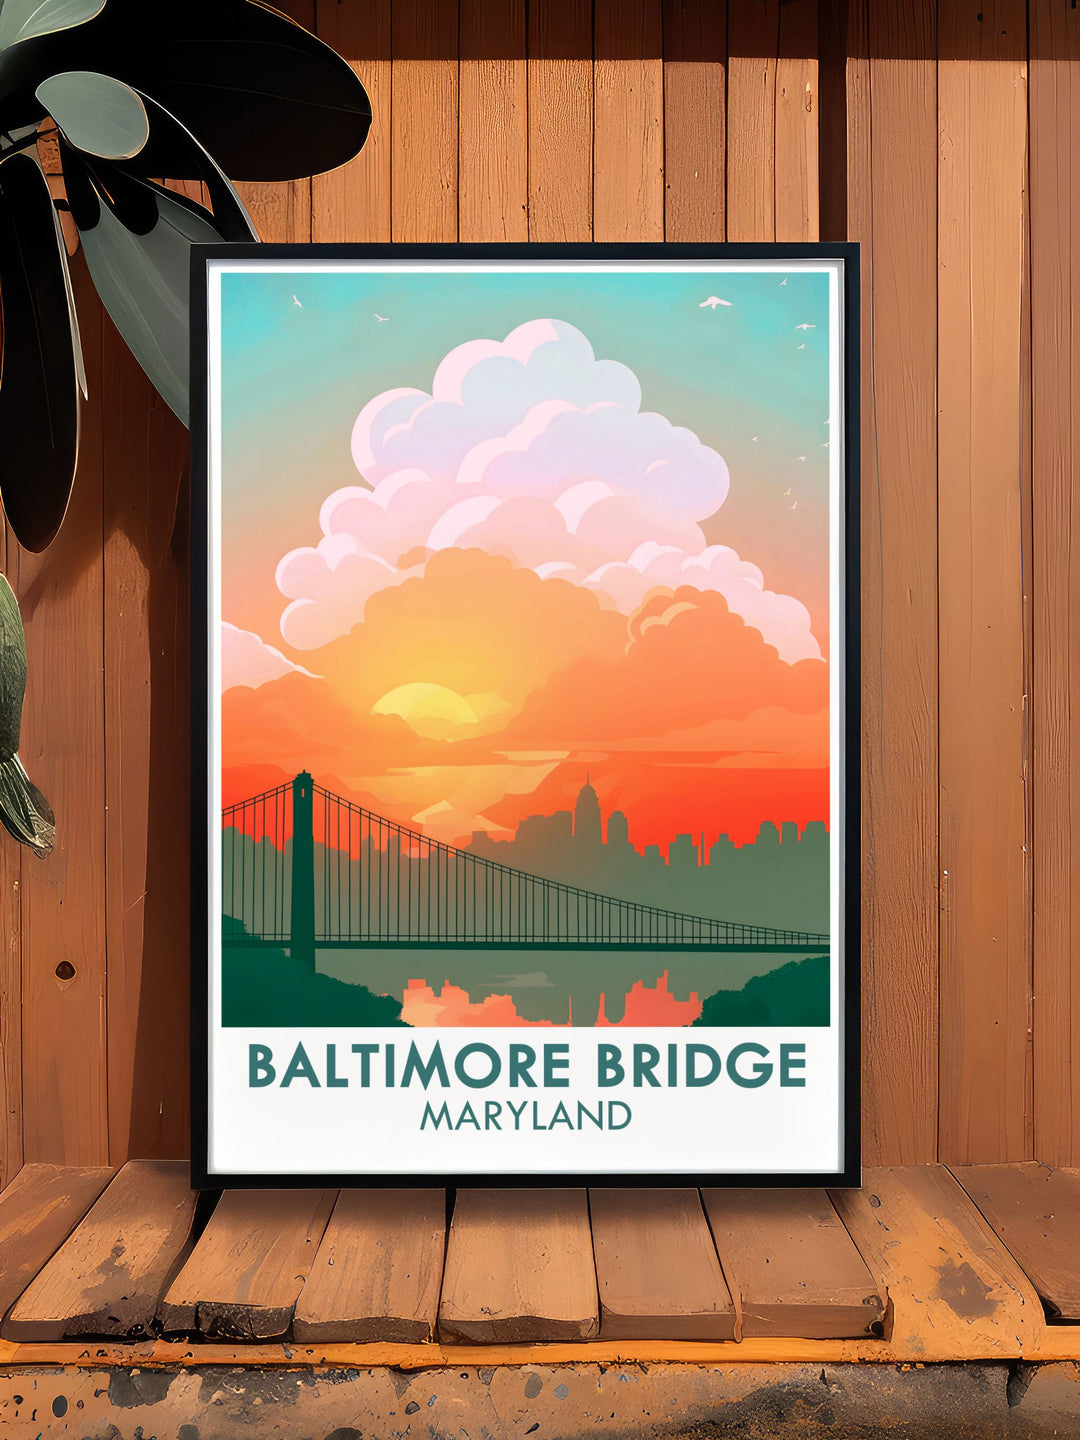 Unique Baltimore art print featuring the new Key Bridge design. The vibrant and detailed artwork makes it a perfect addition to home decor. Great for Maryland artwork collections and housewarming gifts.